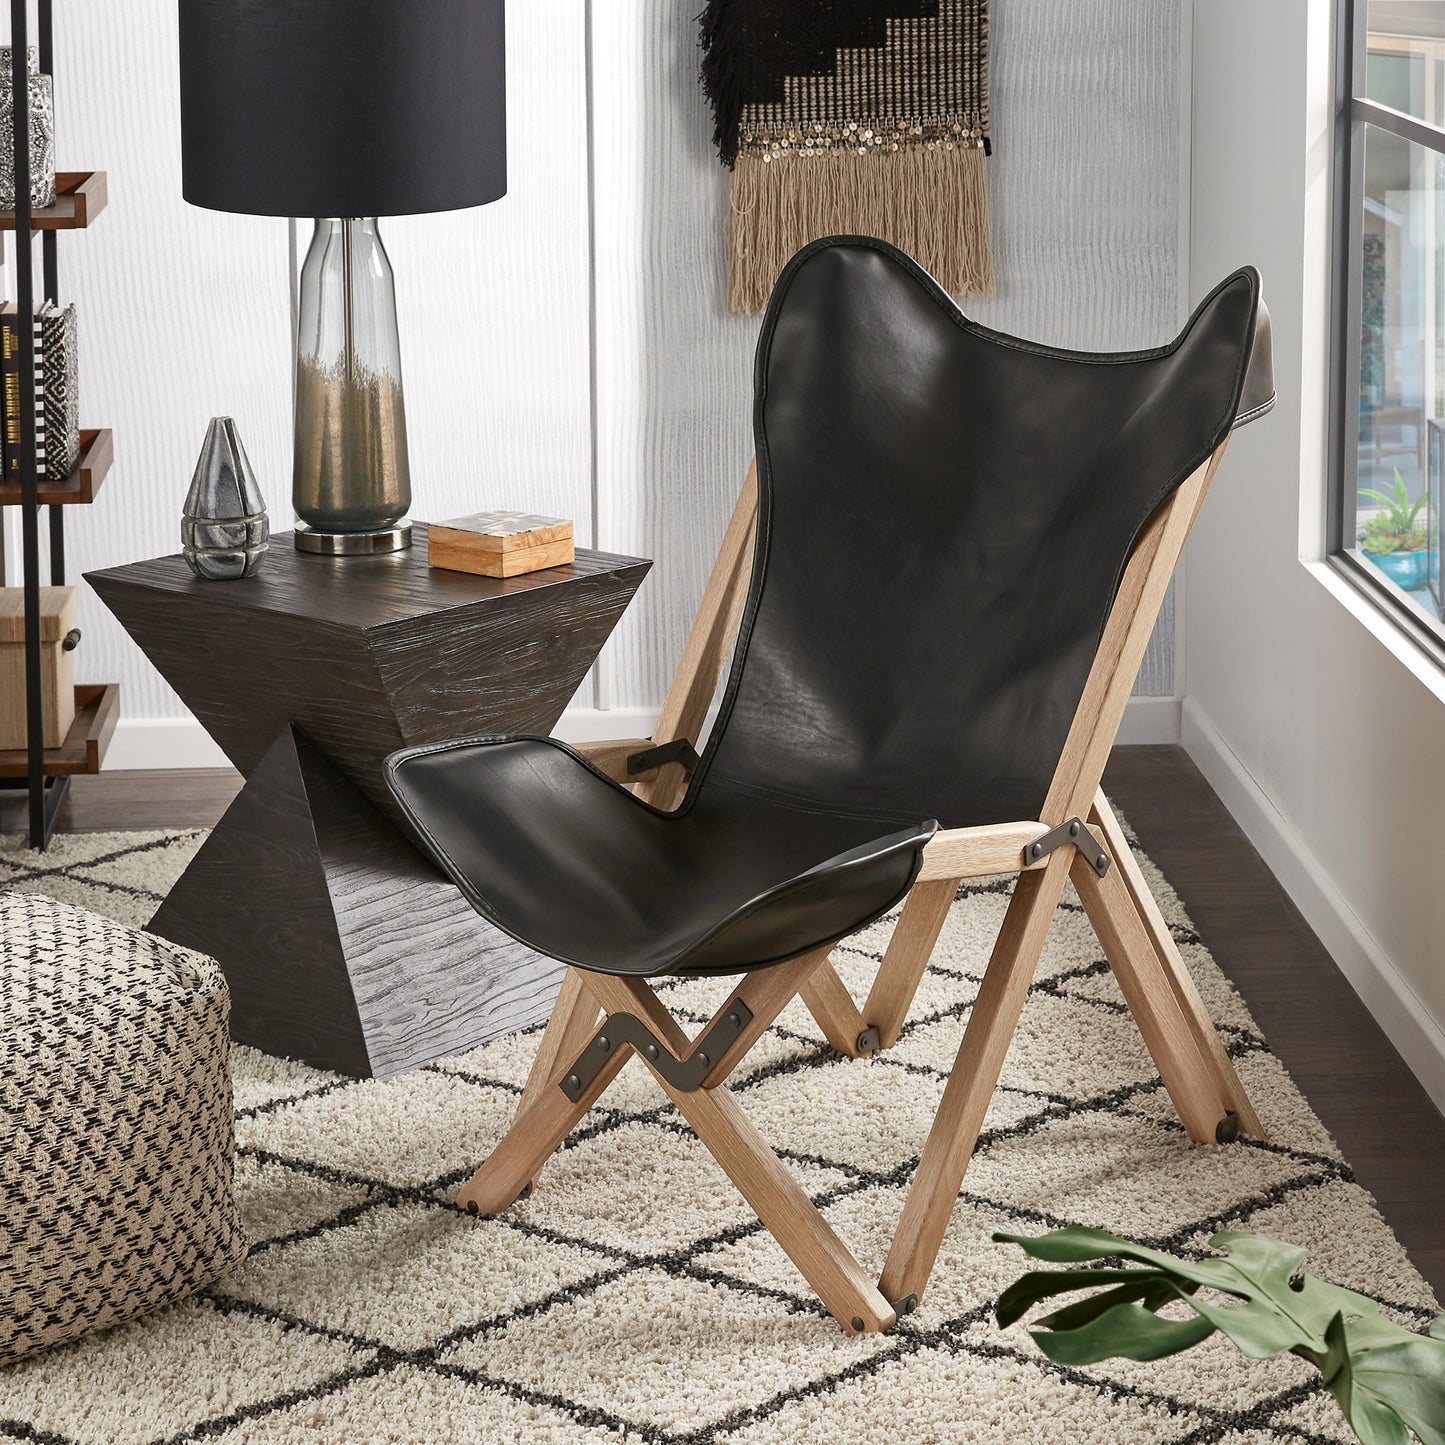 Genuine Top Grain Leather Tripolina Sling Chair - Natural Finish Frame, Black Leather